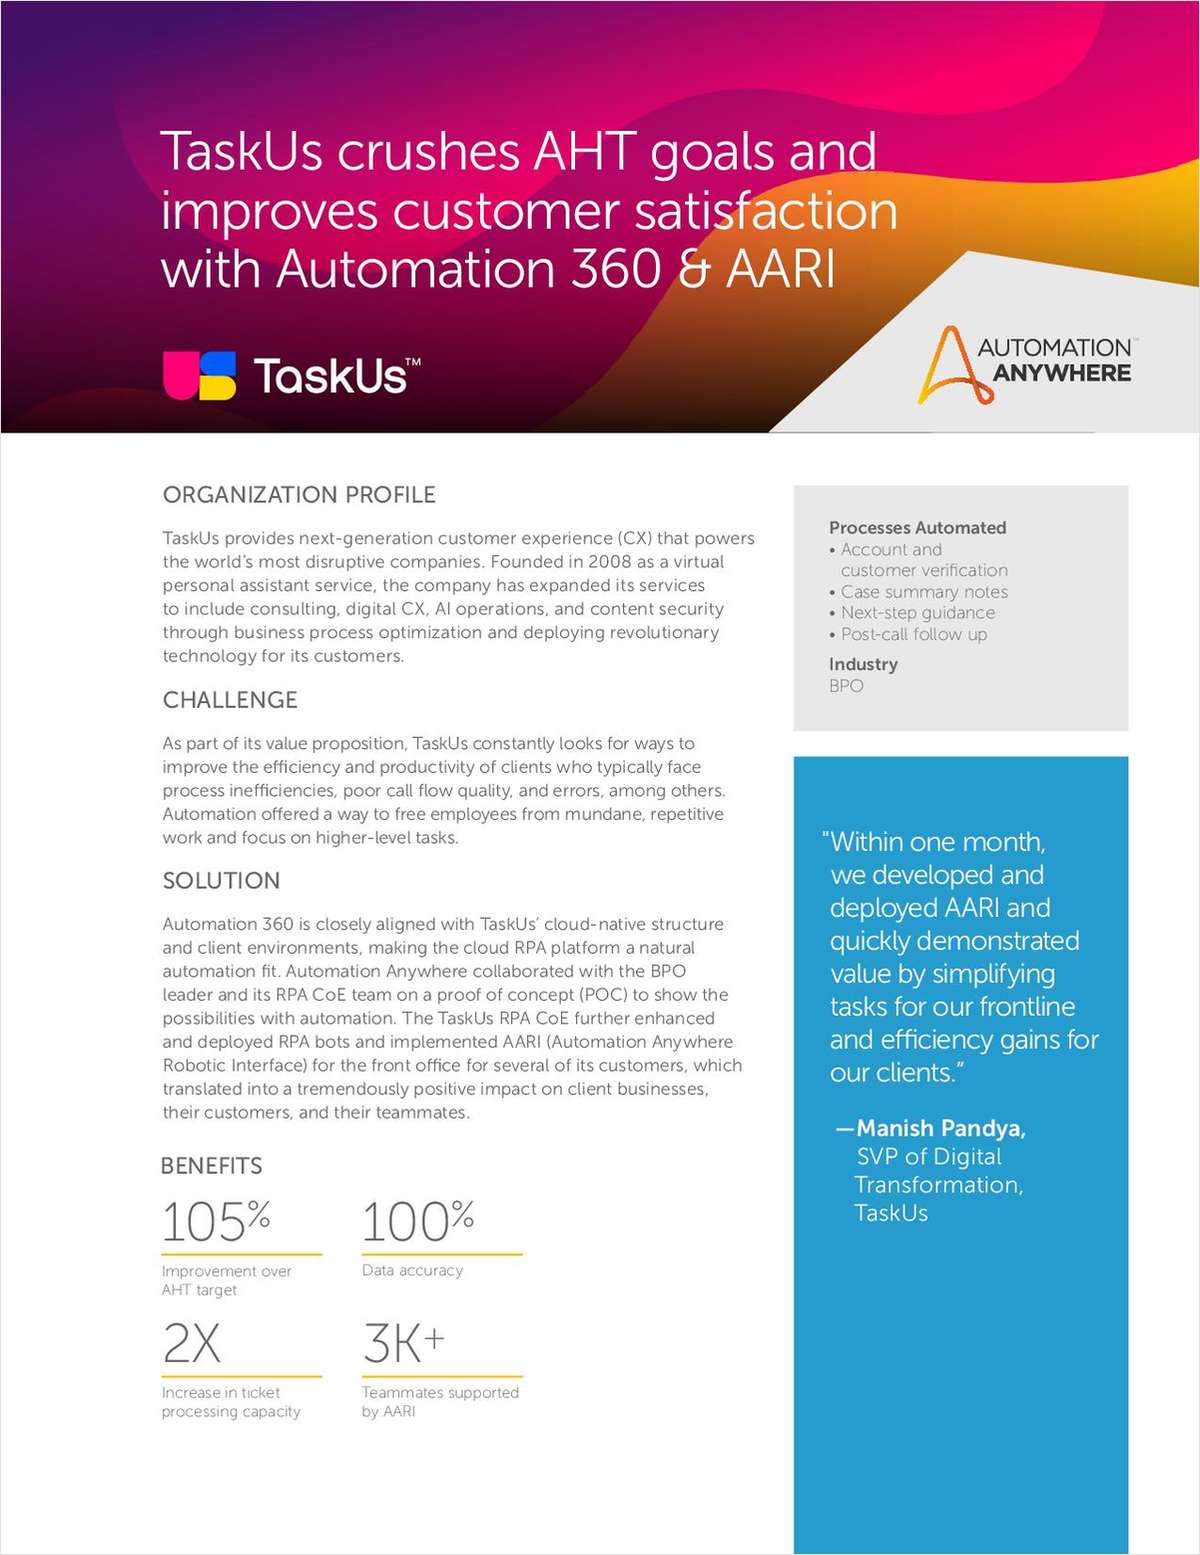 TaskUs crushes AHT goals and improves customer satisfaction with Automation 360 & AARI